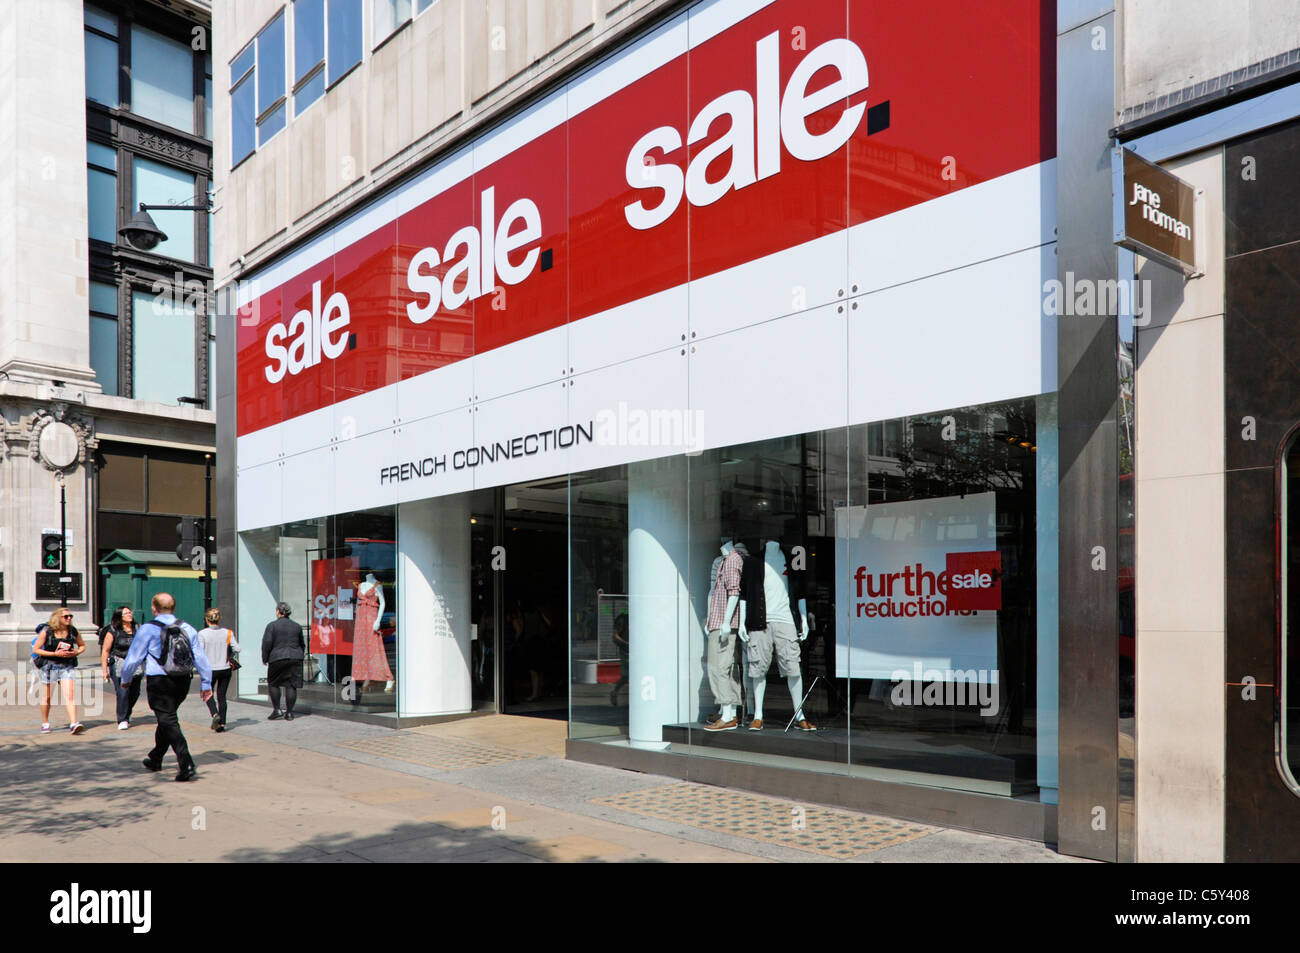 Large sale signs above entrance to French Connection retail fashion business shopping store in Oxford Street London West End England UK Stock Photo